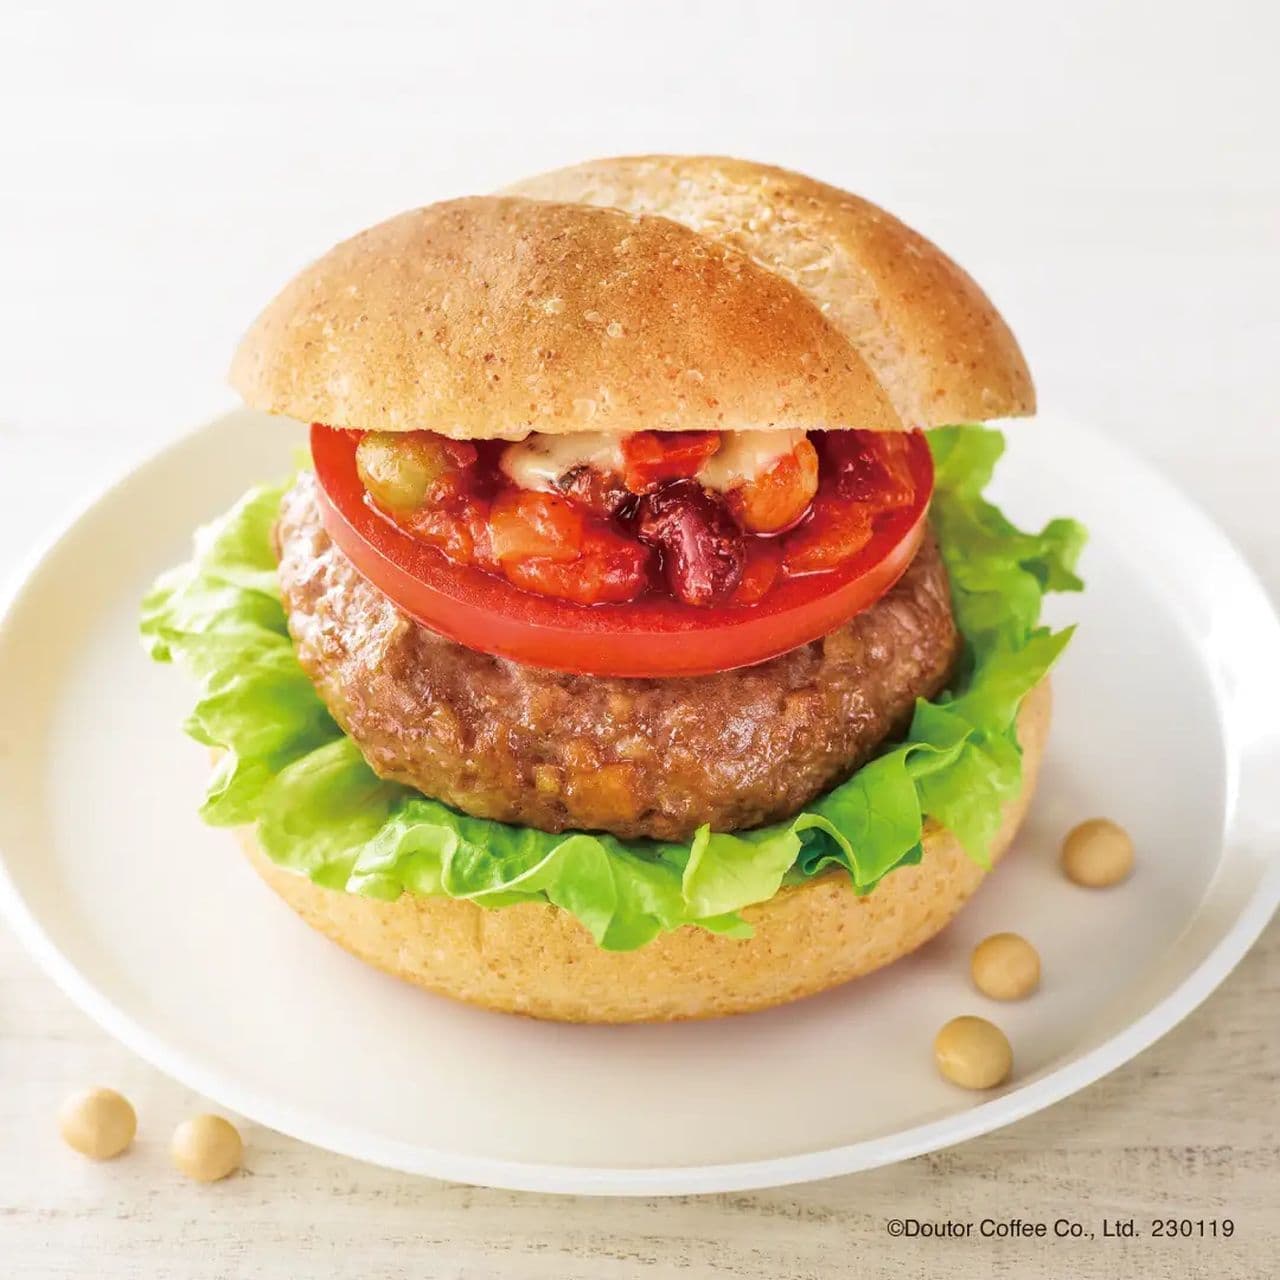 Doutor Coffee Shop "Whole Grain Sandwich Soybean Meat - Beans and Vegetables in Tomato Stew".